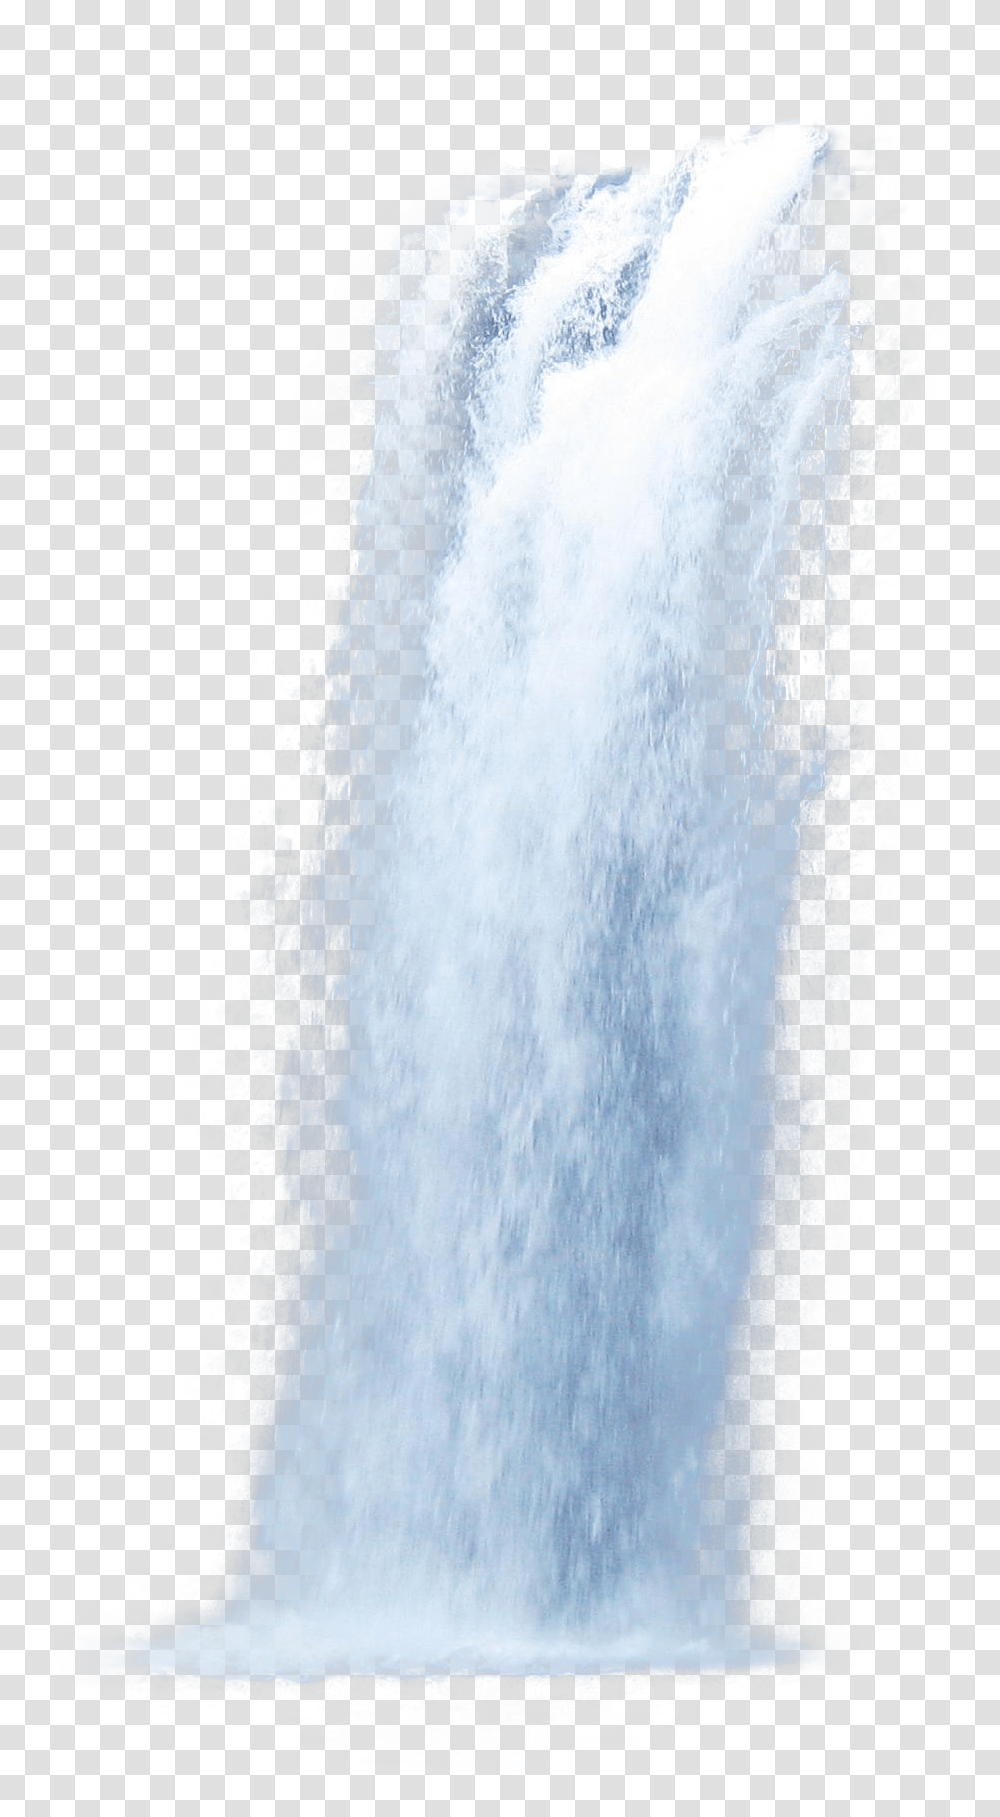 Waterfall Water Waterfall, River, Outdoors Transparent Png